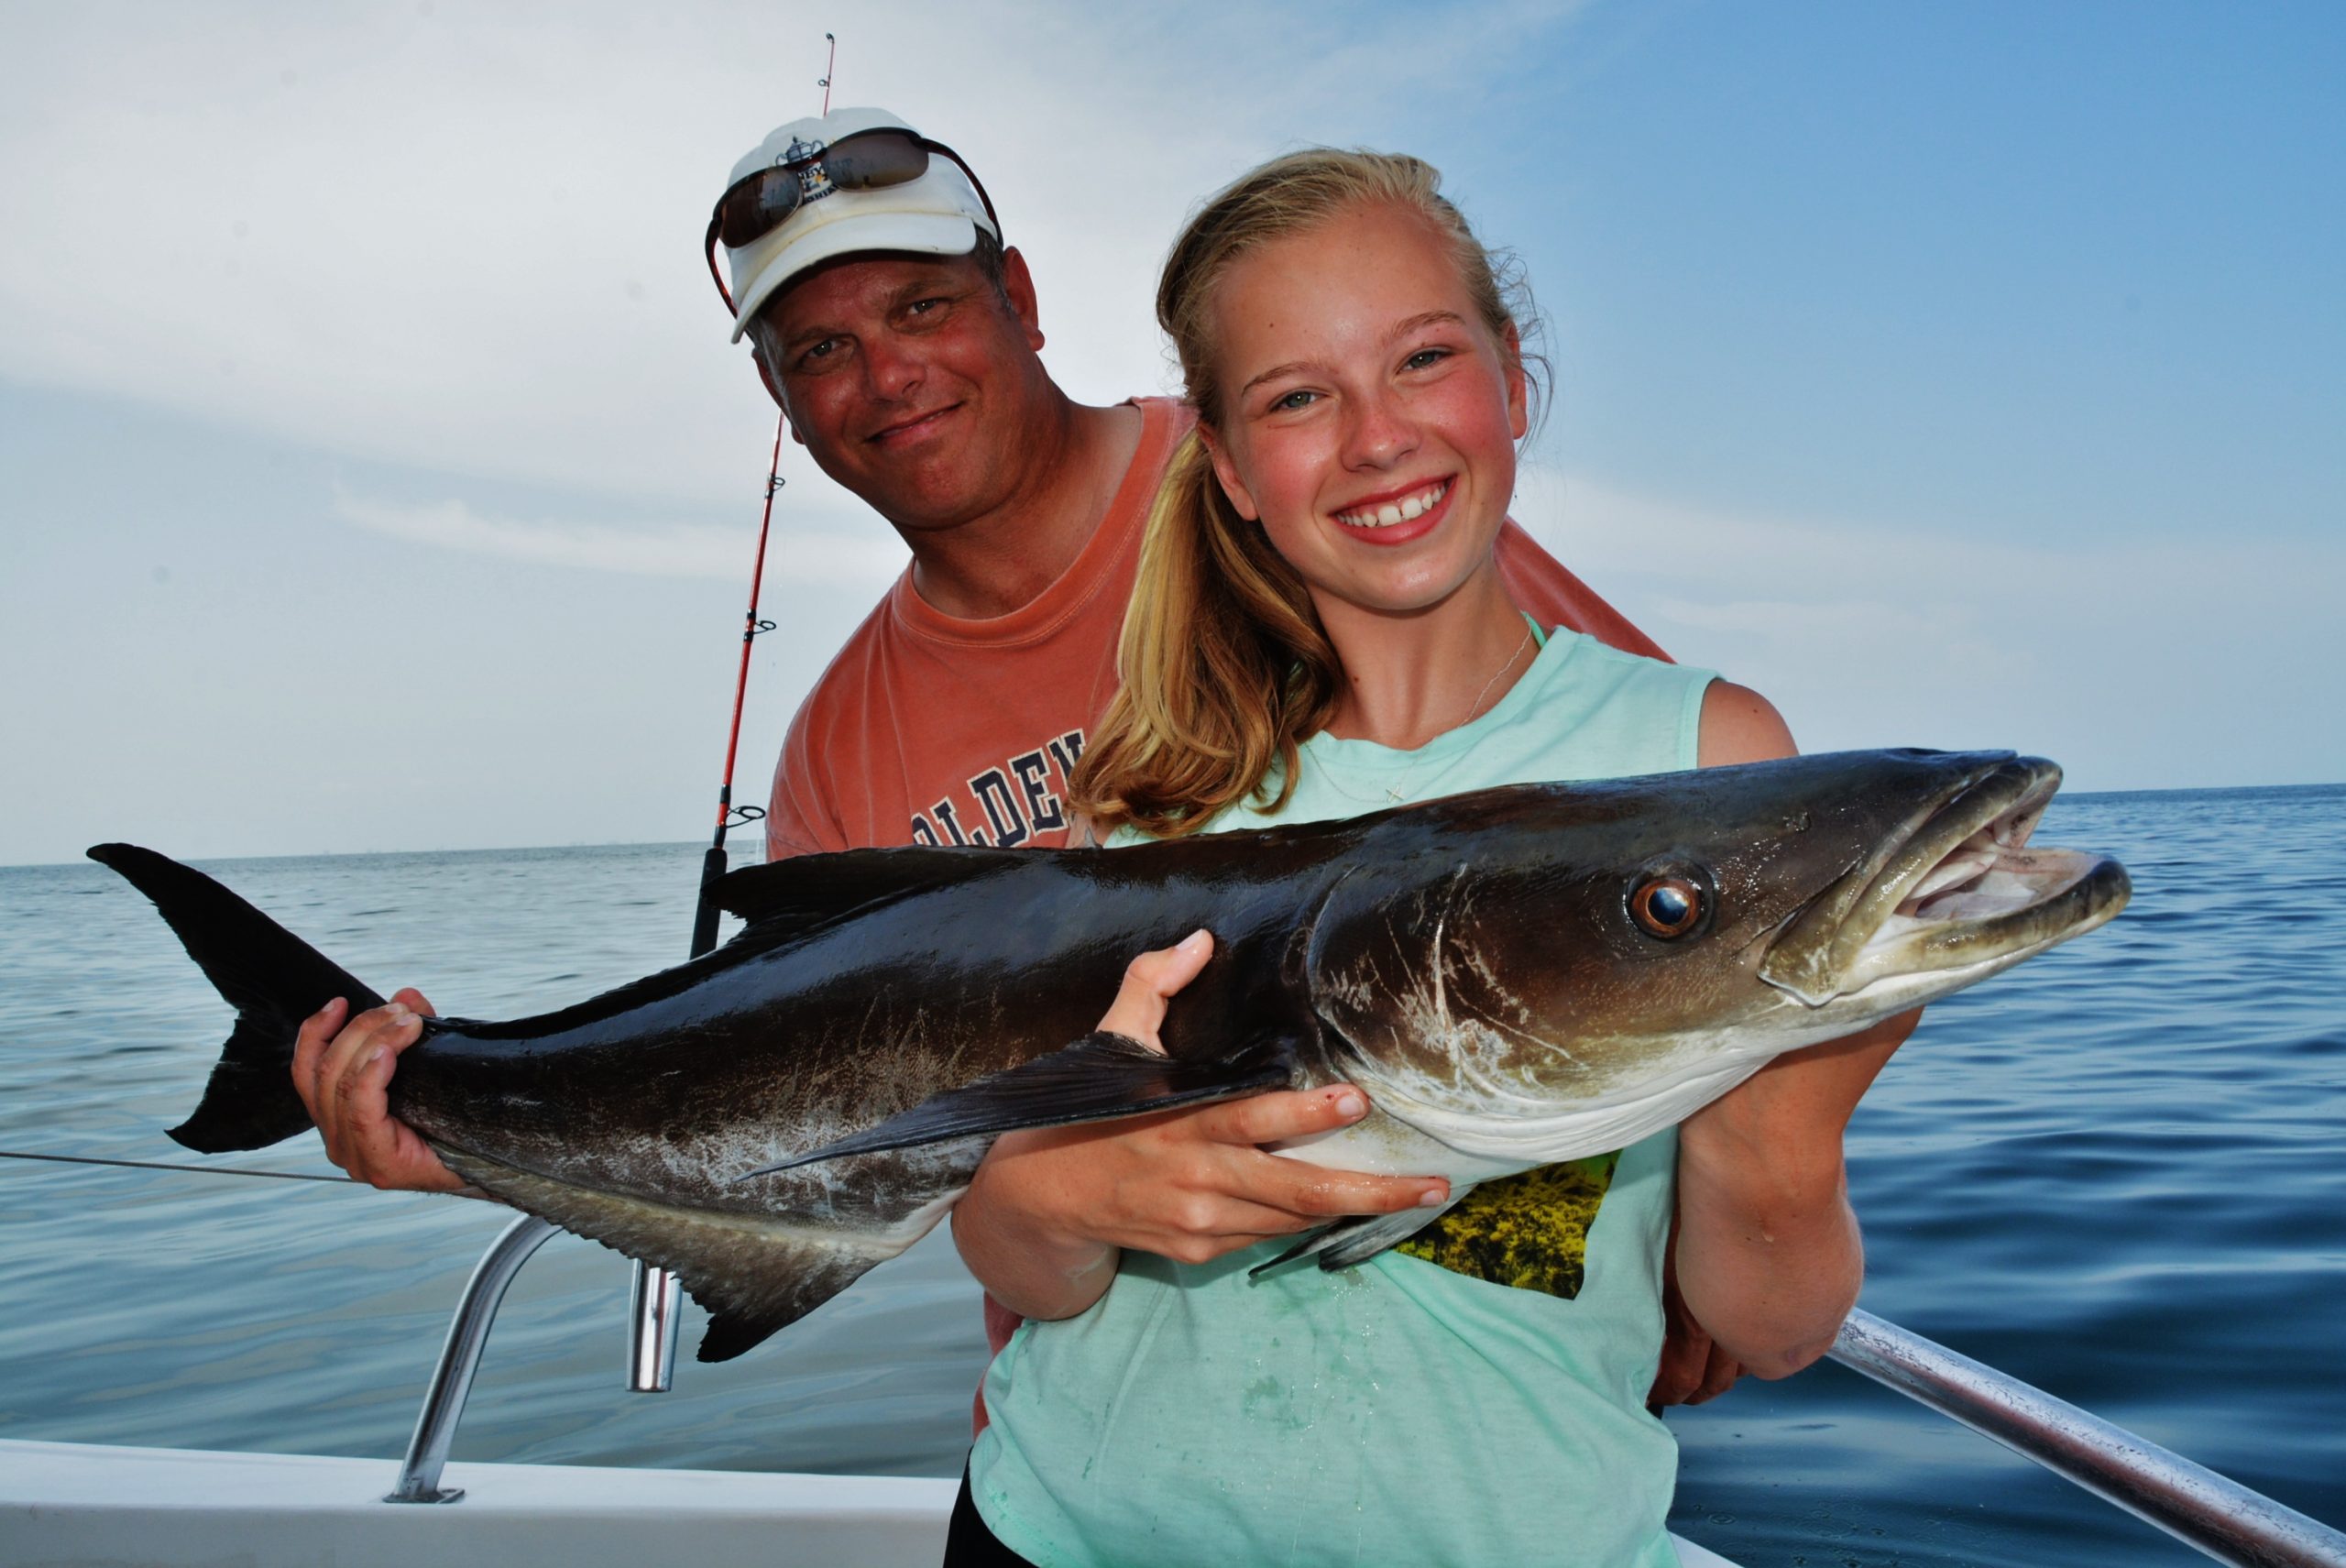 How To Catch Countless Bonito - Florida Sport Fishing TV- Popular Offshore  Bait 